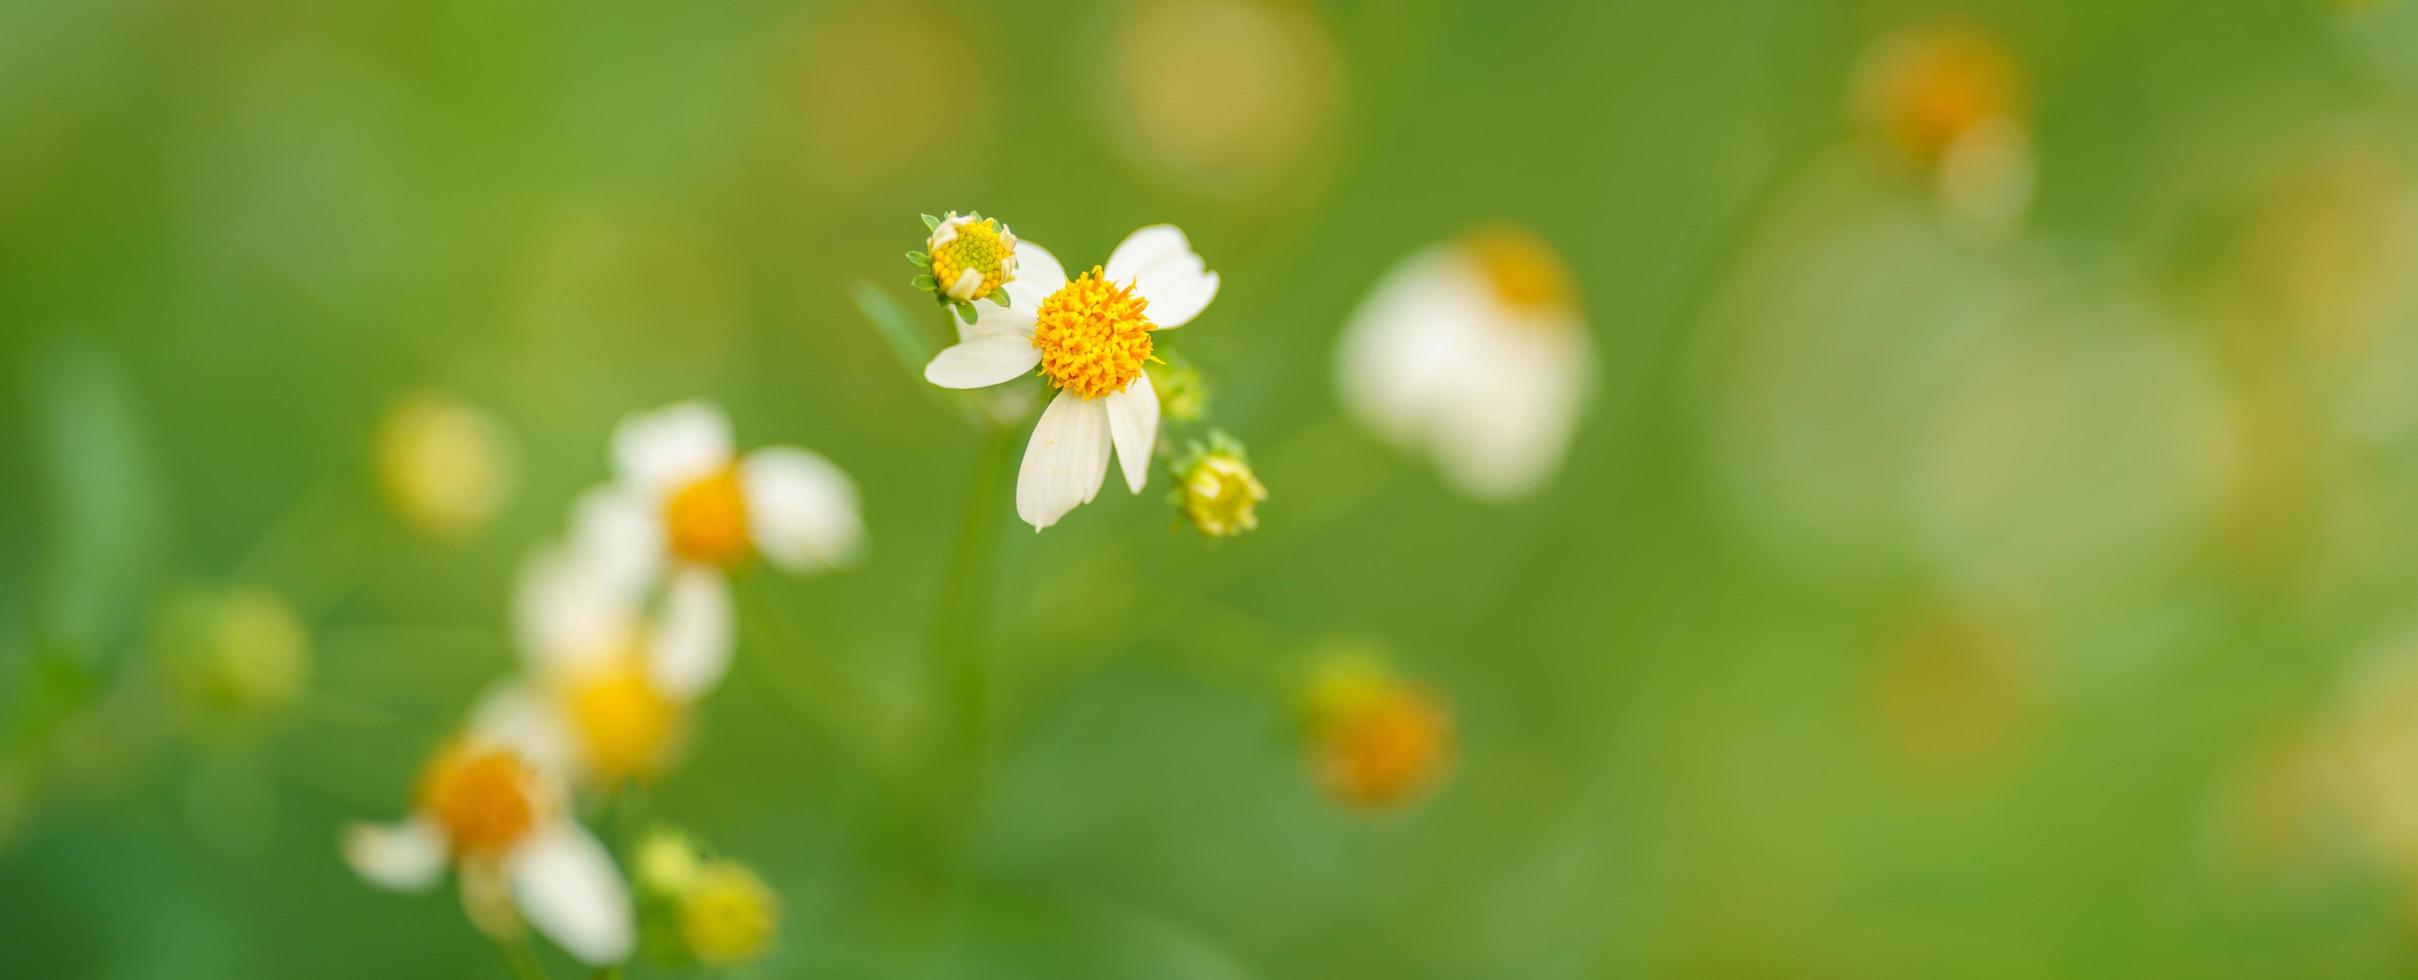 Closeup of grass white flower with yellow pollen under sunlight with copy space using as background natural plants landscape, ecology wallpaper cover page concept. photo